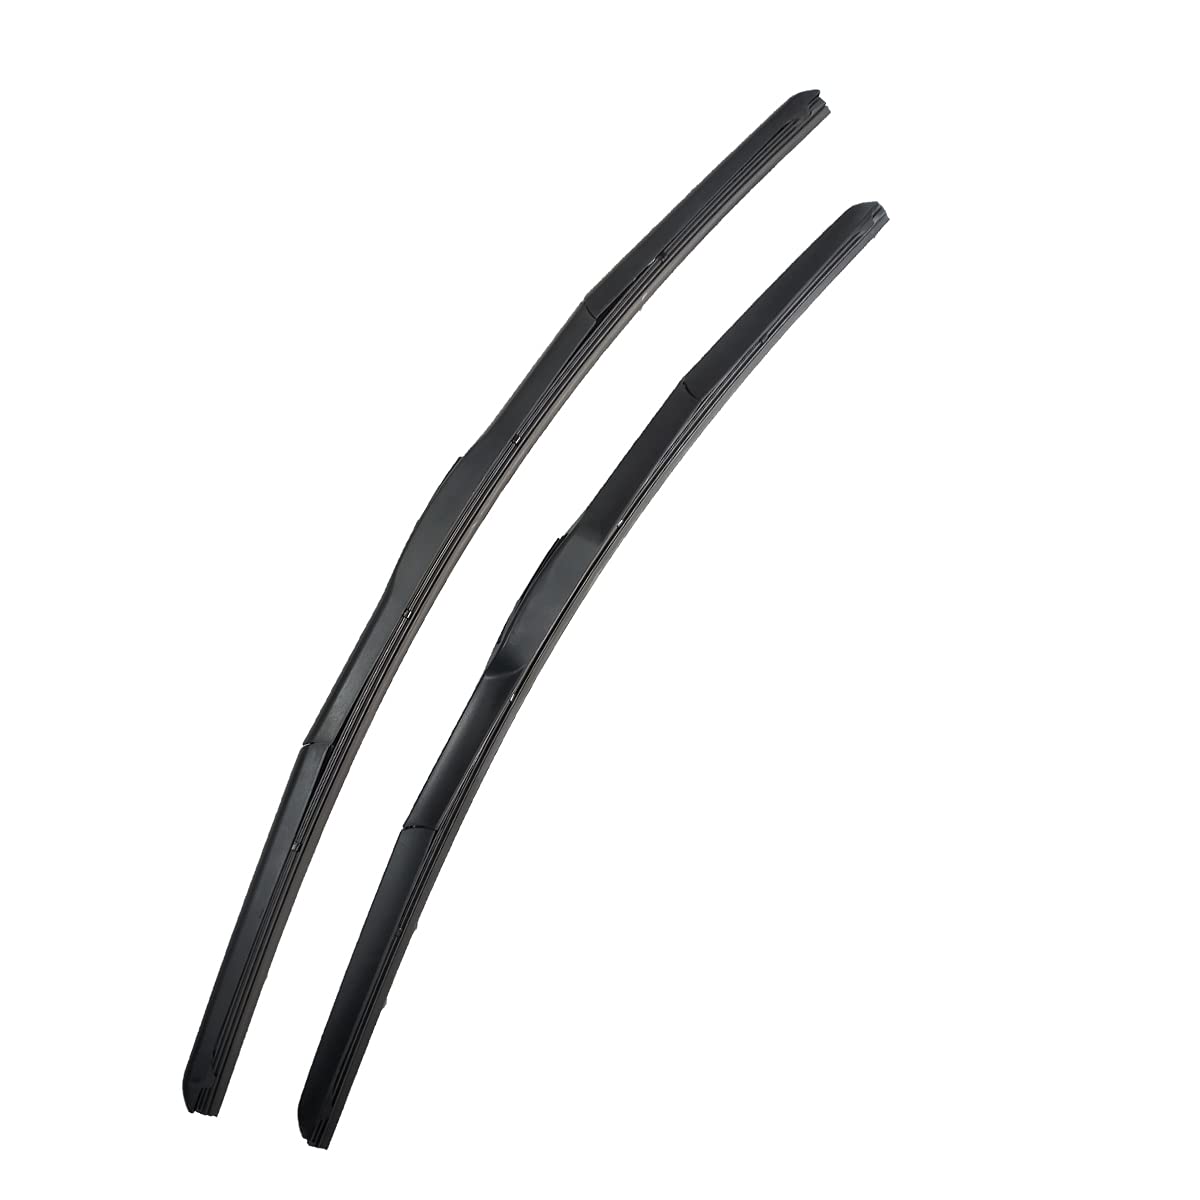 Oshotto Frameless (O.E.M Type) Wiper Blades Compatible with Honda Civic New(26" 24")